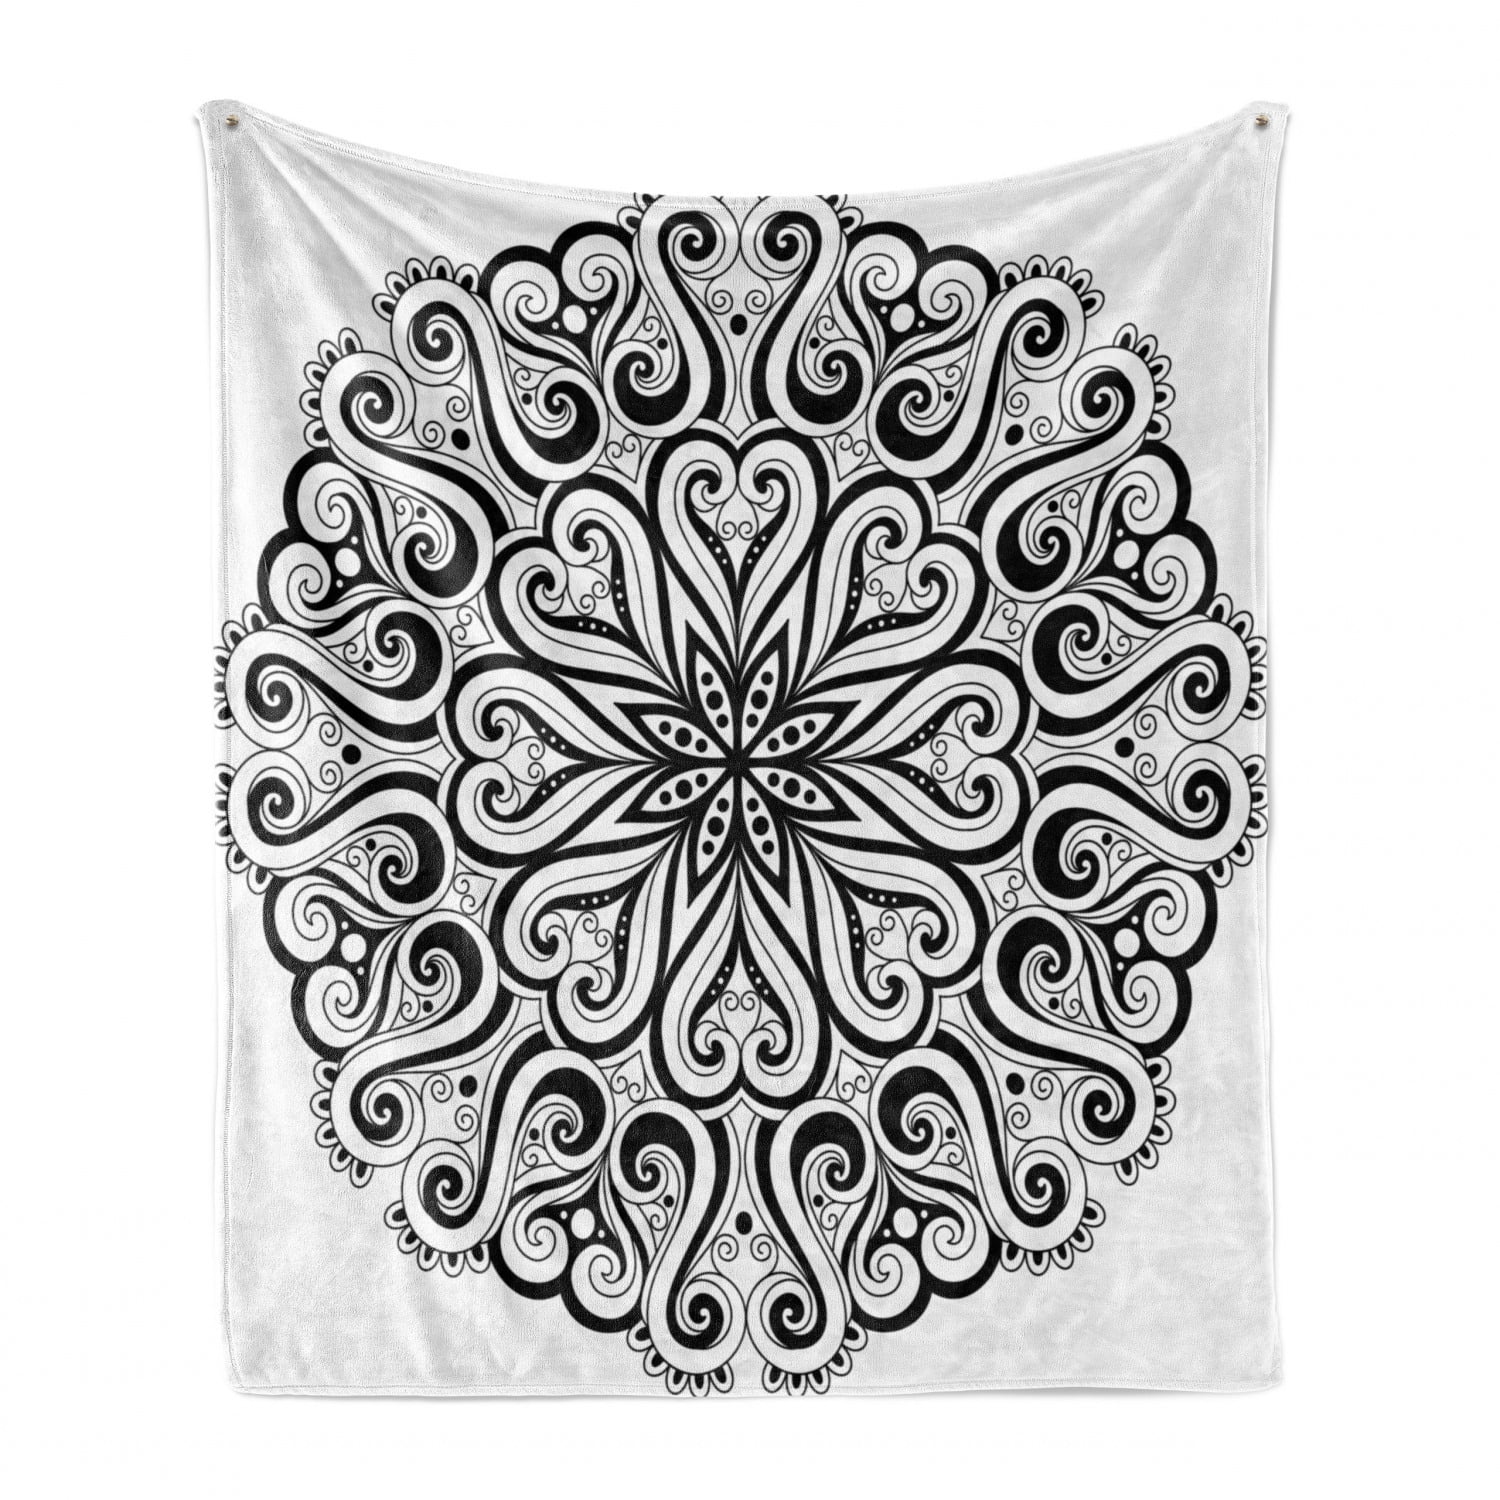 60 x 80 Cozy Plush for Indoor and Outdoor Use Grey Black Mandala with Aztec Tribal Textured Ornamental Cosmos Floral Pattern Ambesonne Lotus Soft Flannel Fleece Throw Blanket 